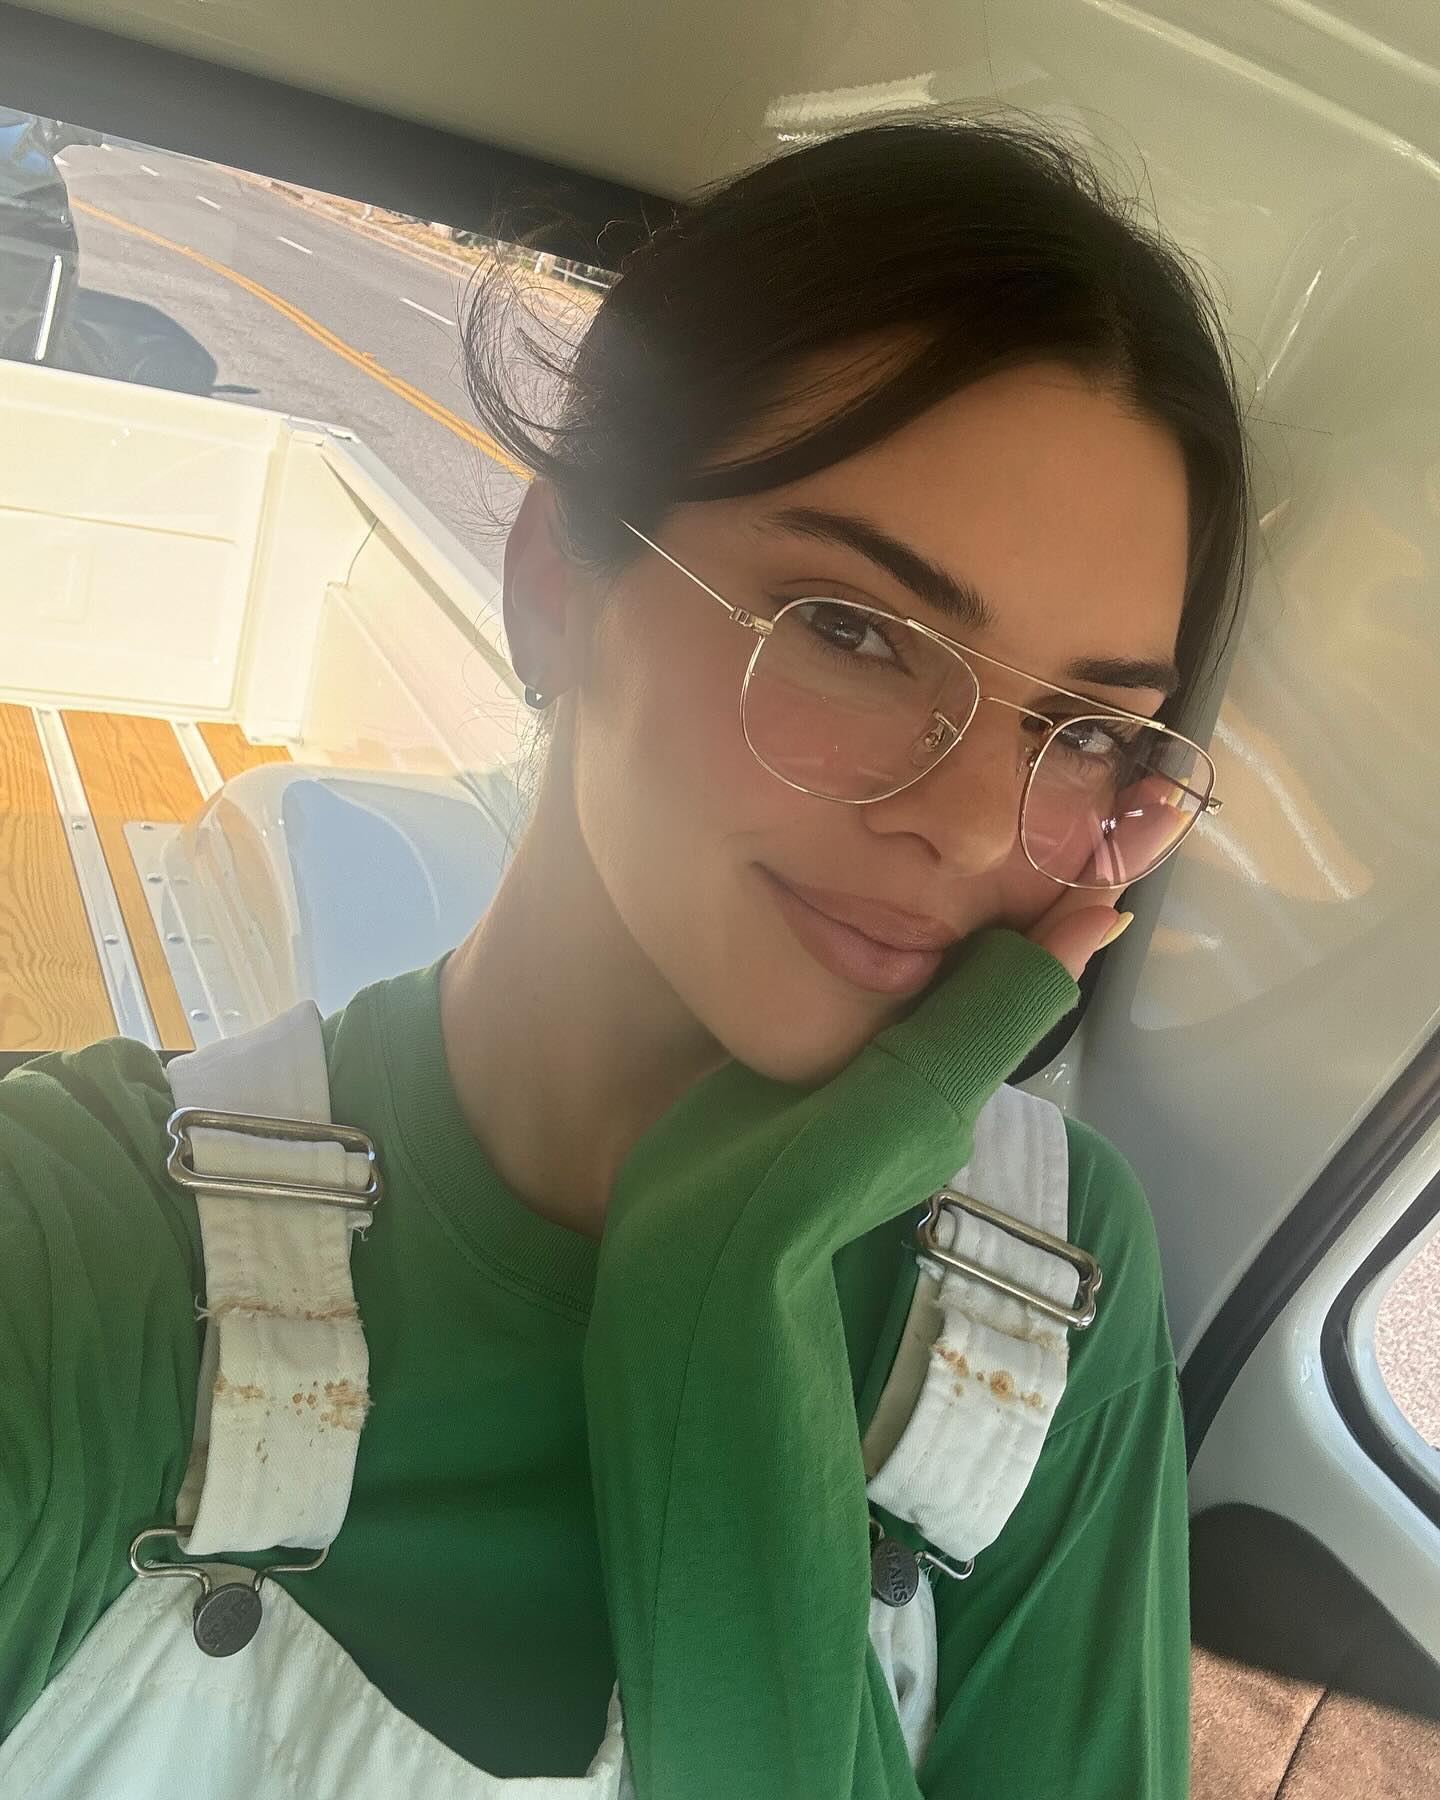 Kendall Jenner poses for a selfie in a recent Instagram post